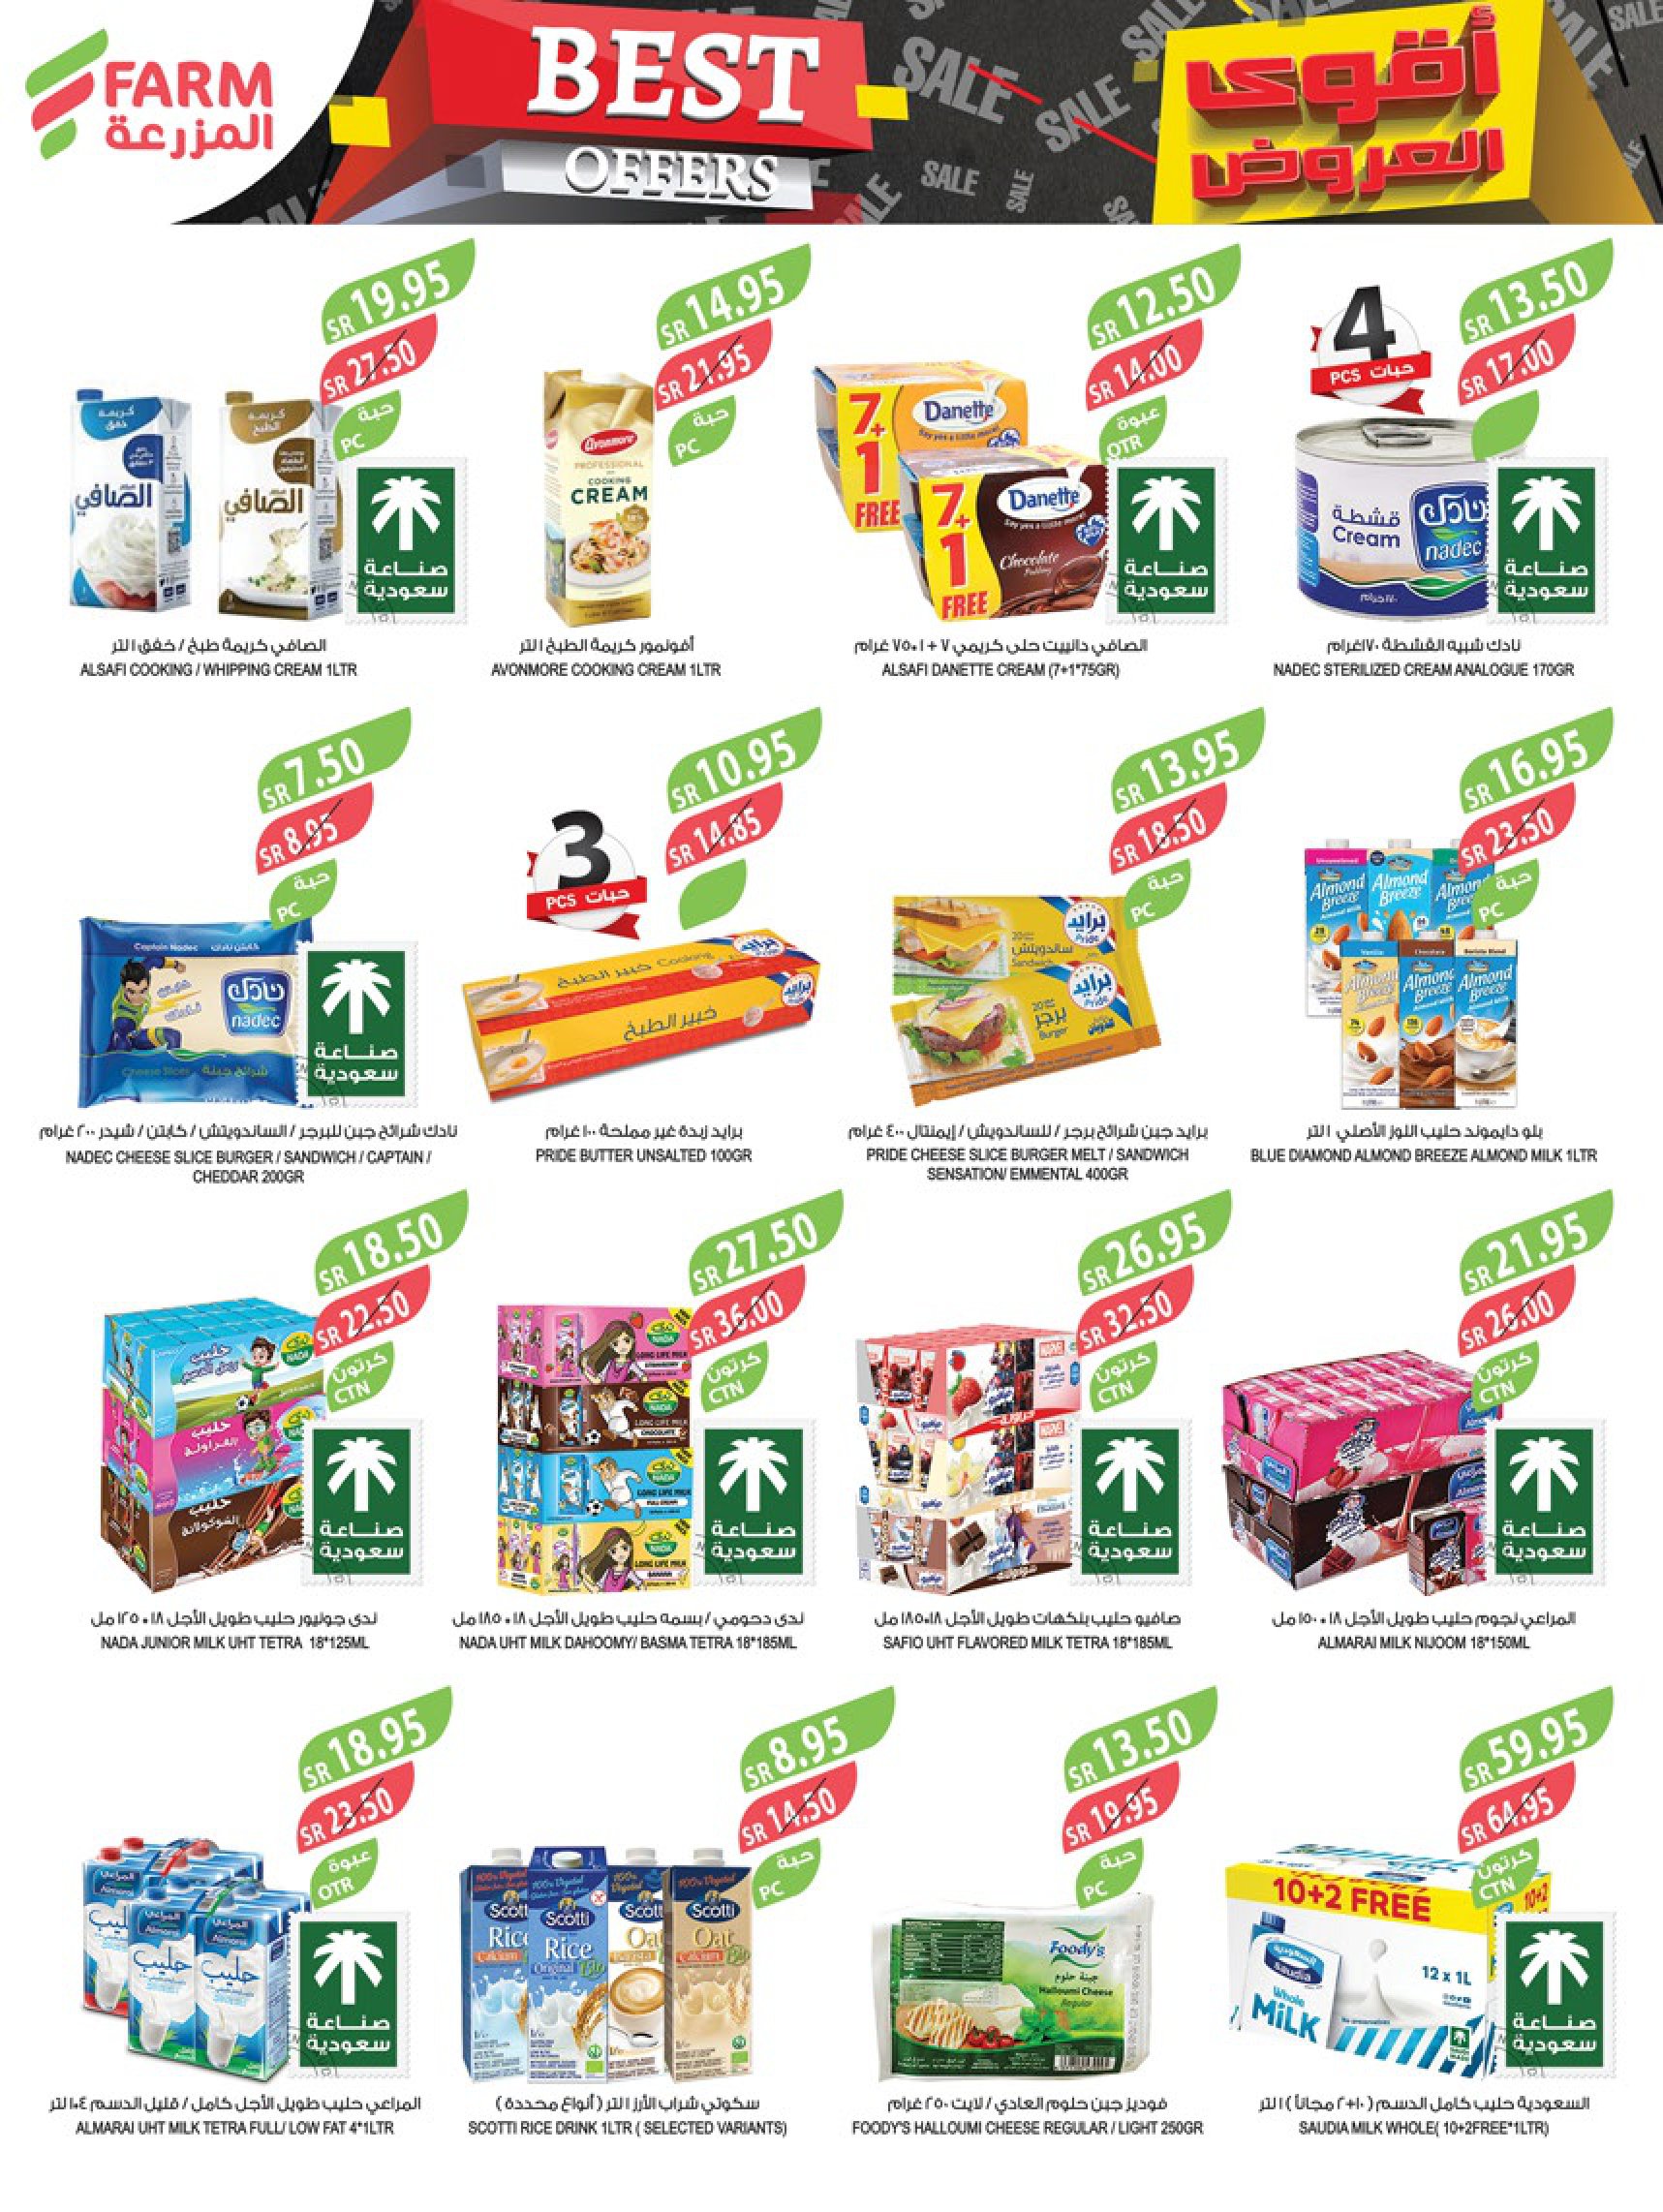 Page 28 at new leaflet for Best Offers at Farm jeizan najran abu areesh abha